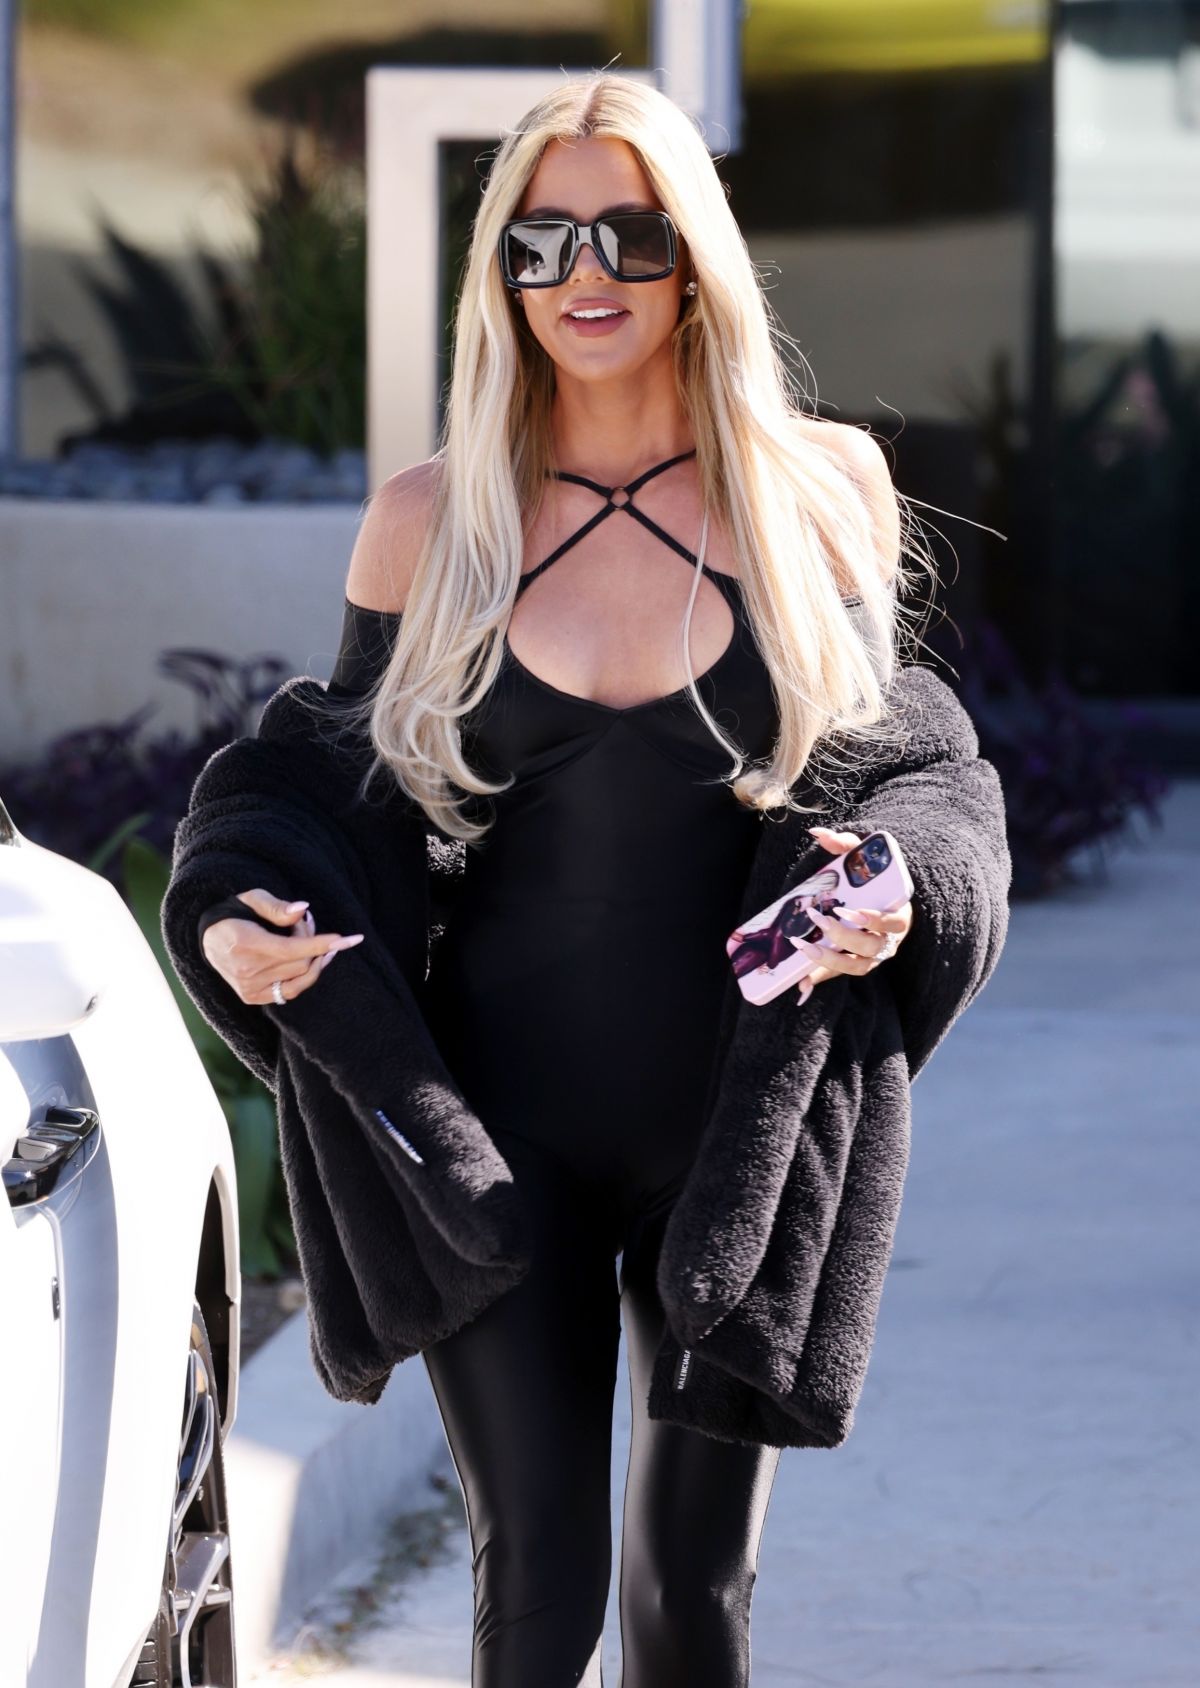 KHLOE KARDASHIAN Out and About in Burbank 02/10/2022 – HawtCelebs